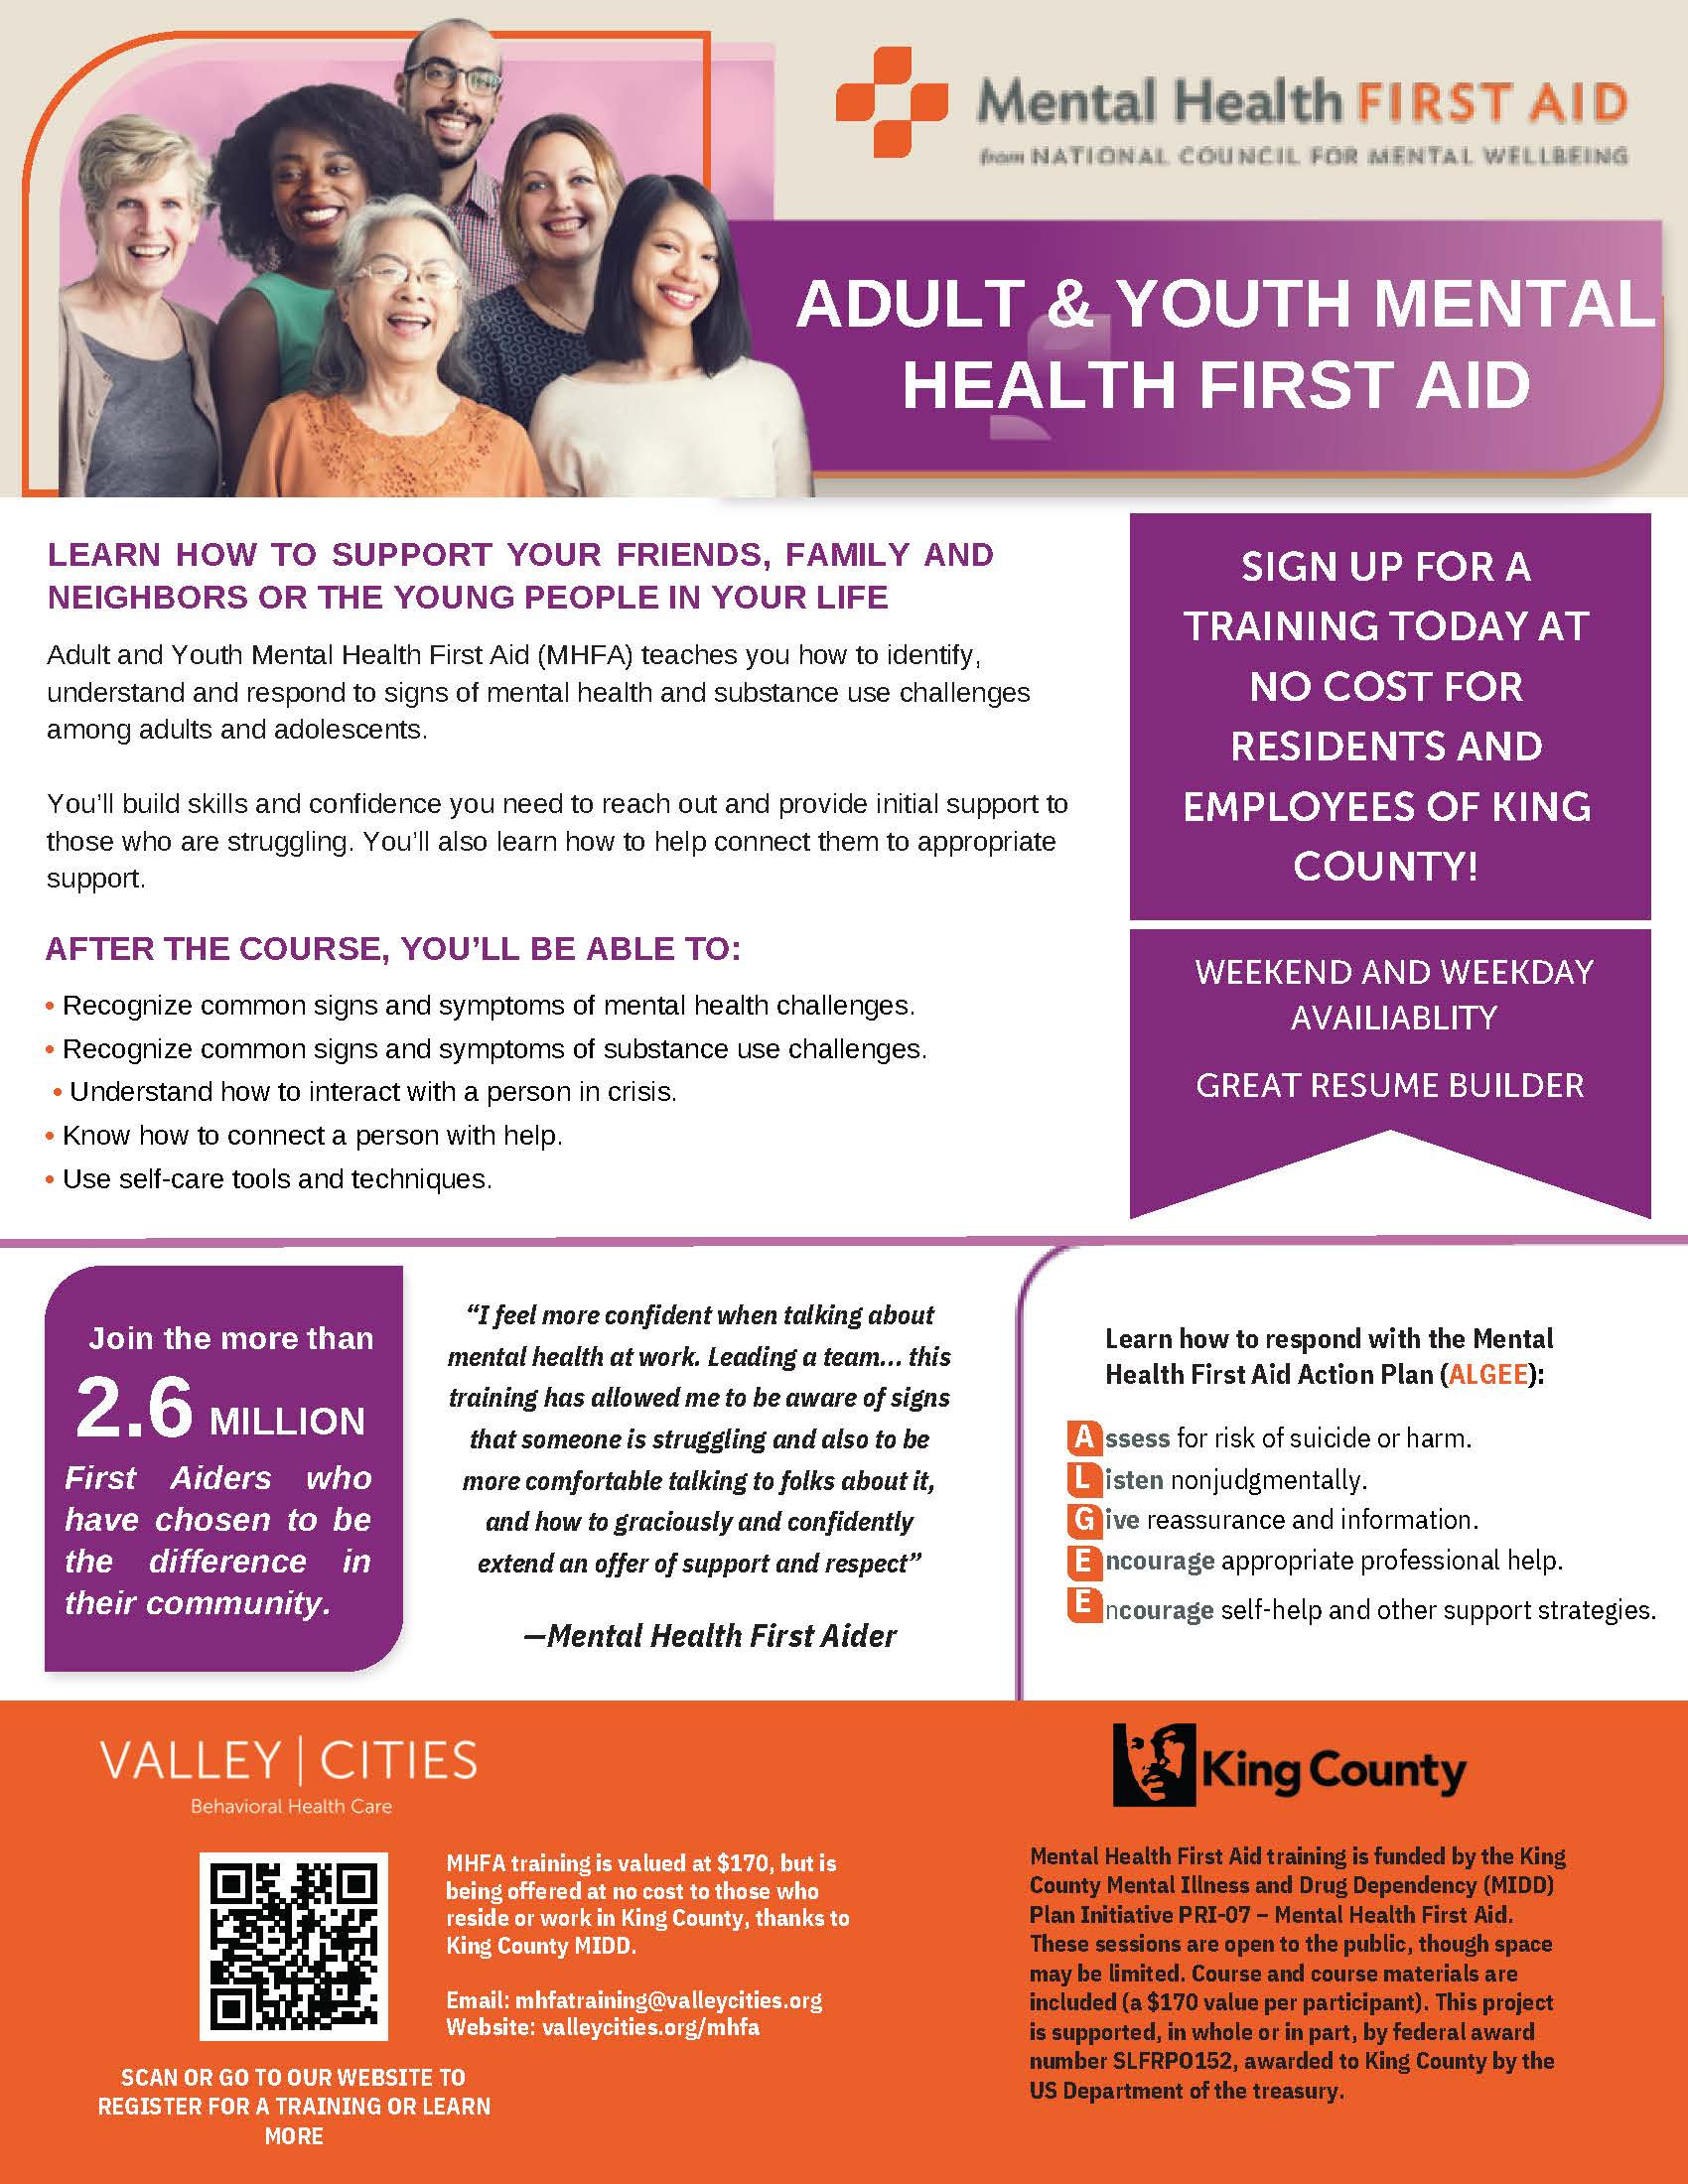 An infographic about "ADULT & YOUTH MENTAL HEALTH FIRST AID" click on the graphic for more information.